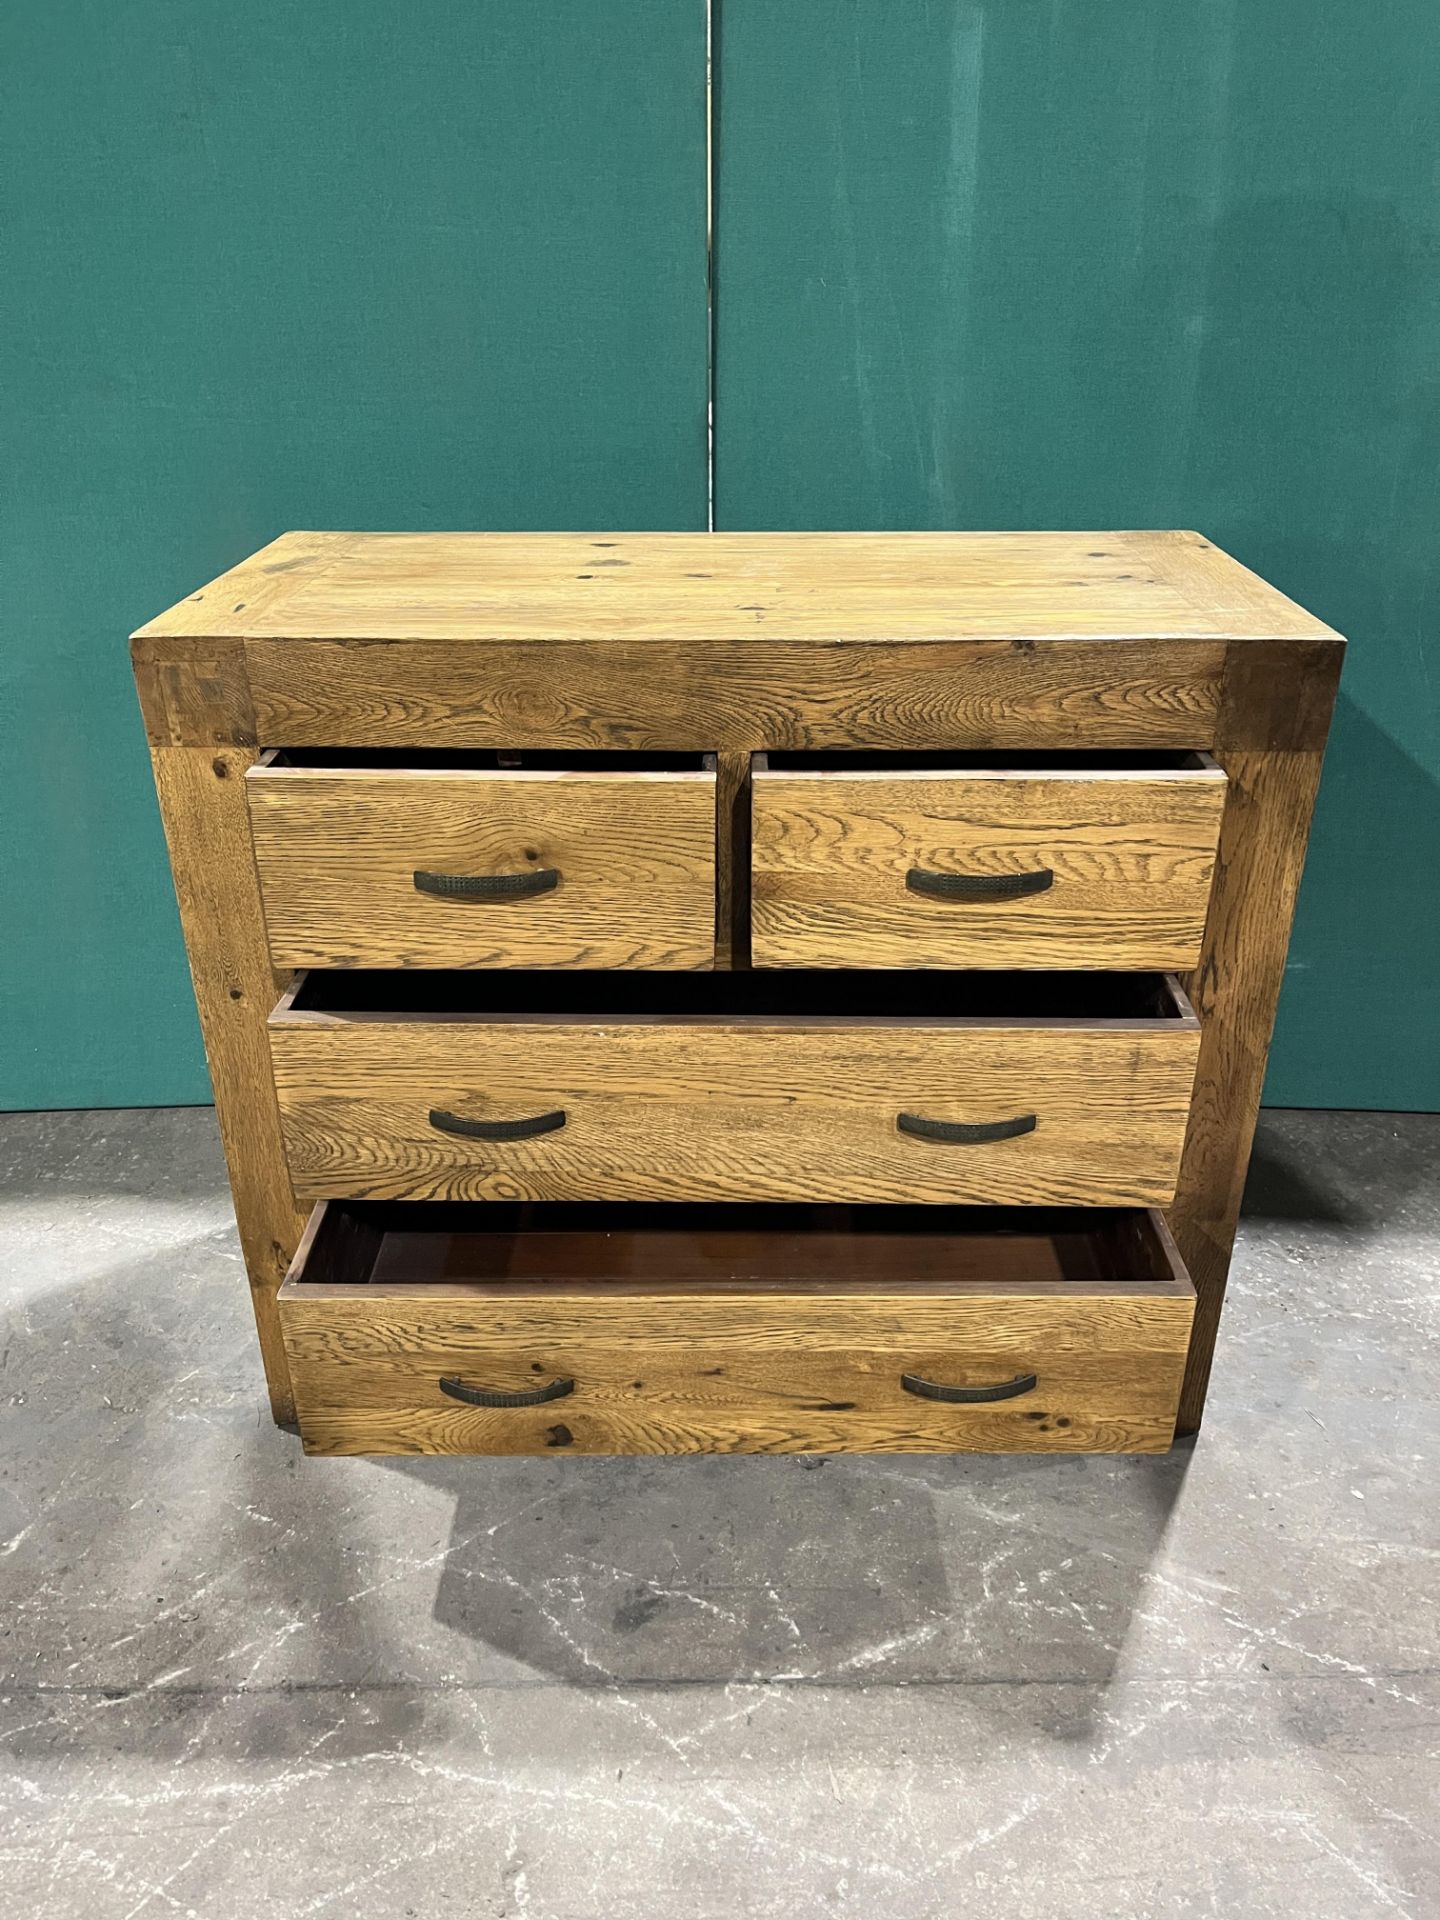 Oak Chest of Drawers | 2 Over 2 Drawer - Image 4 of 4